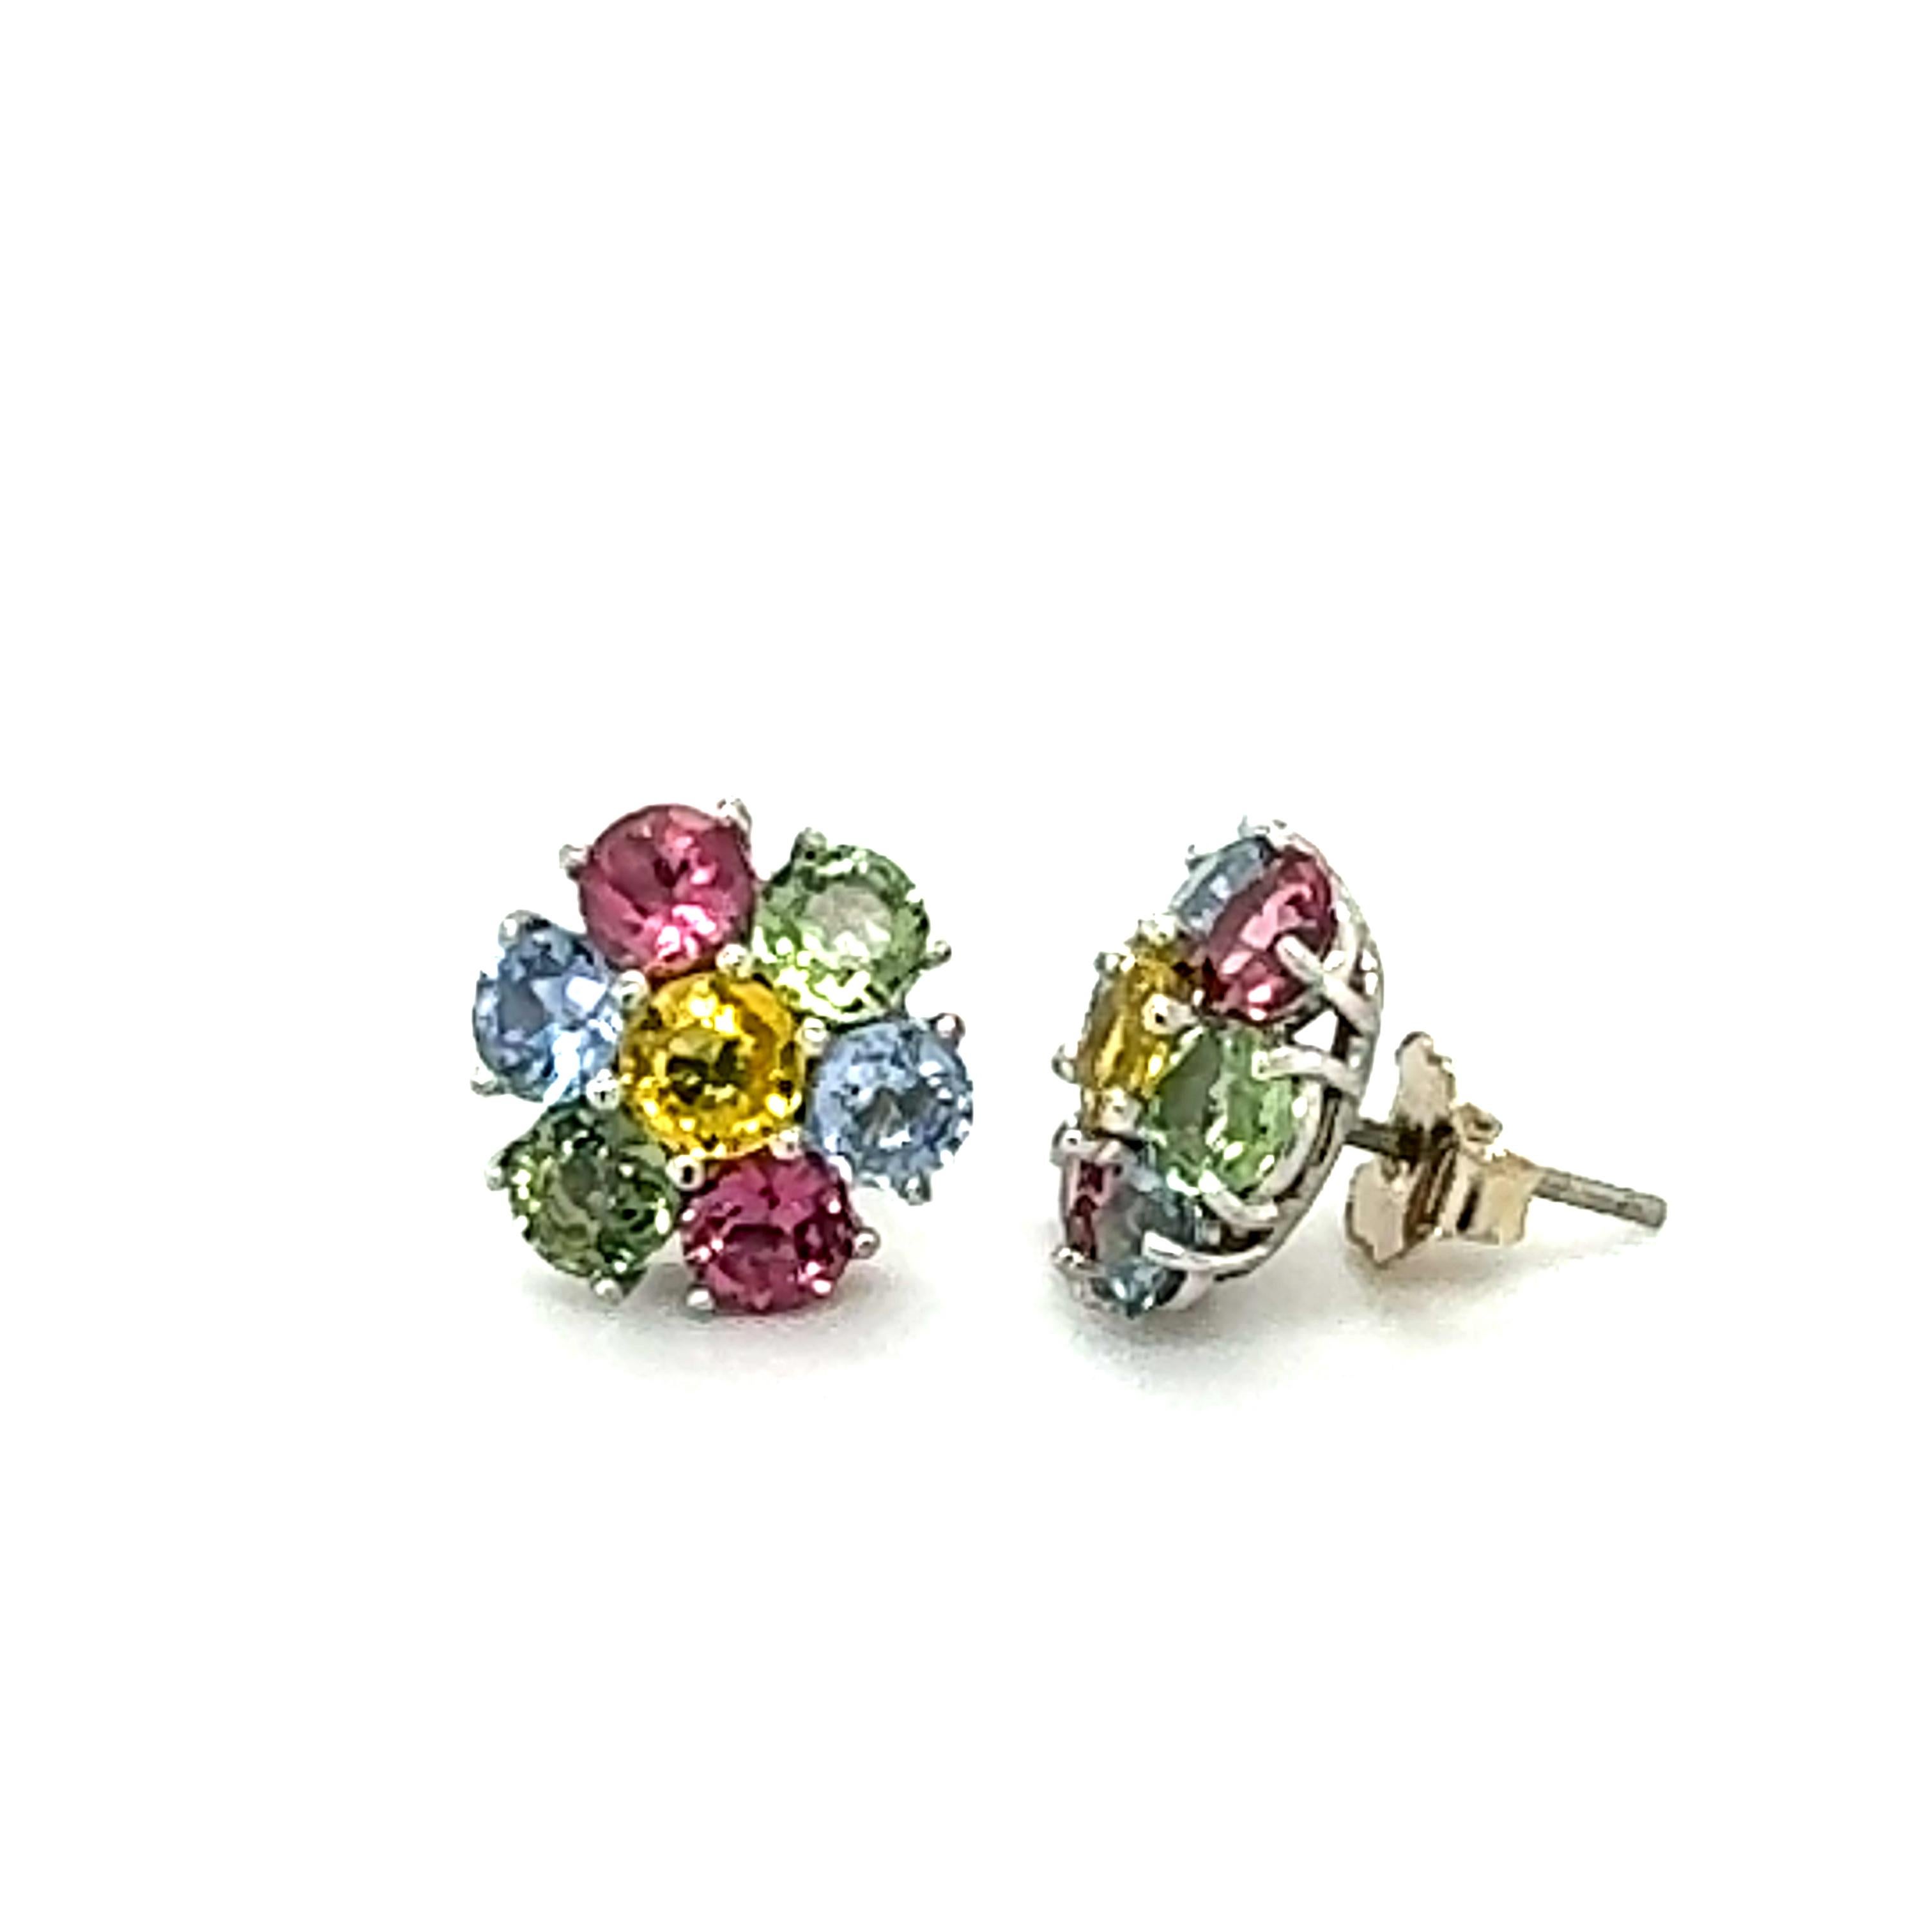 4.61 Carat Natural Sapphire Tourmaline White Gold Stud Earrings

Cute, dainty earrings that are versatile and great for an everyday look!  

There are 10 Multi-Colored Sapphires and 4 Pink Tourmaline set to create a Flower Petal Design.  The total